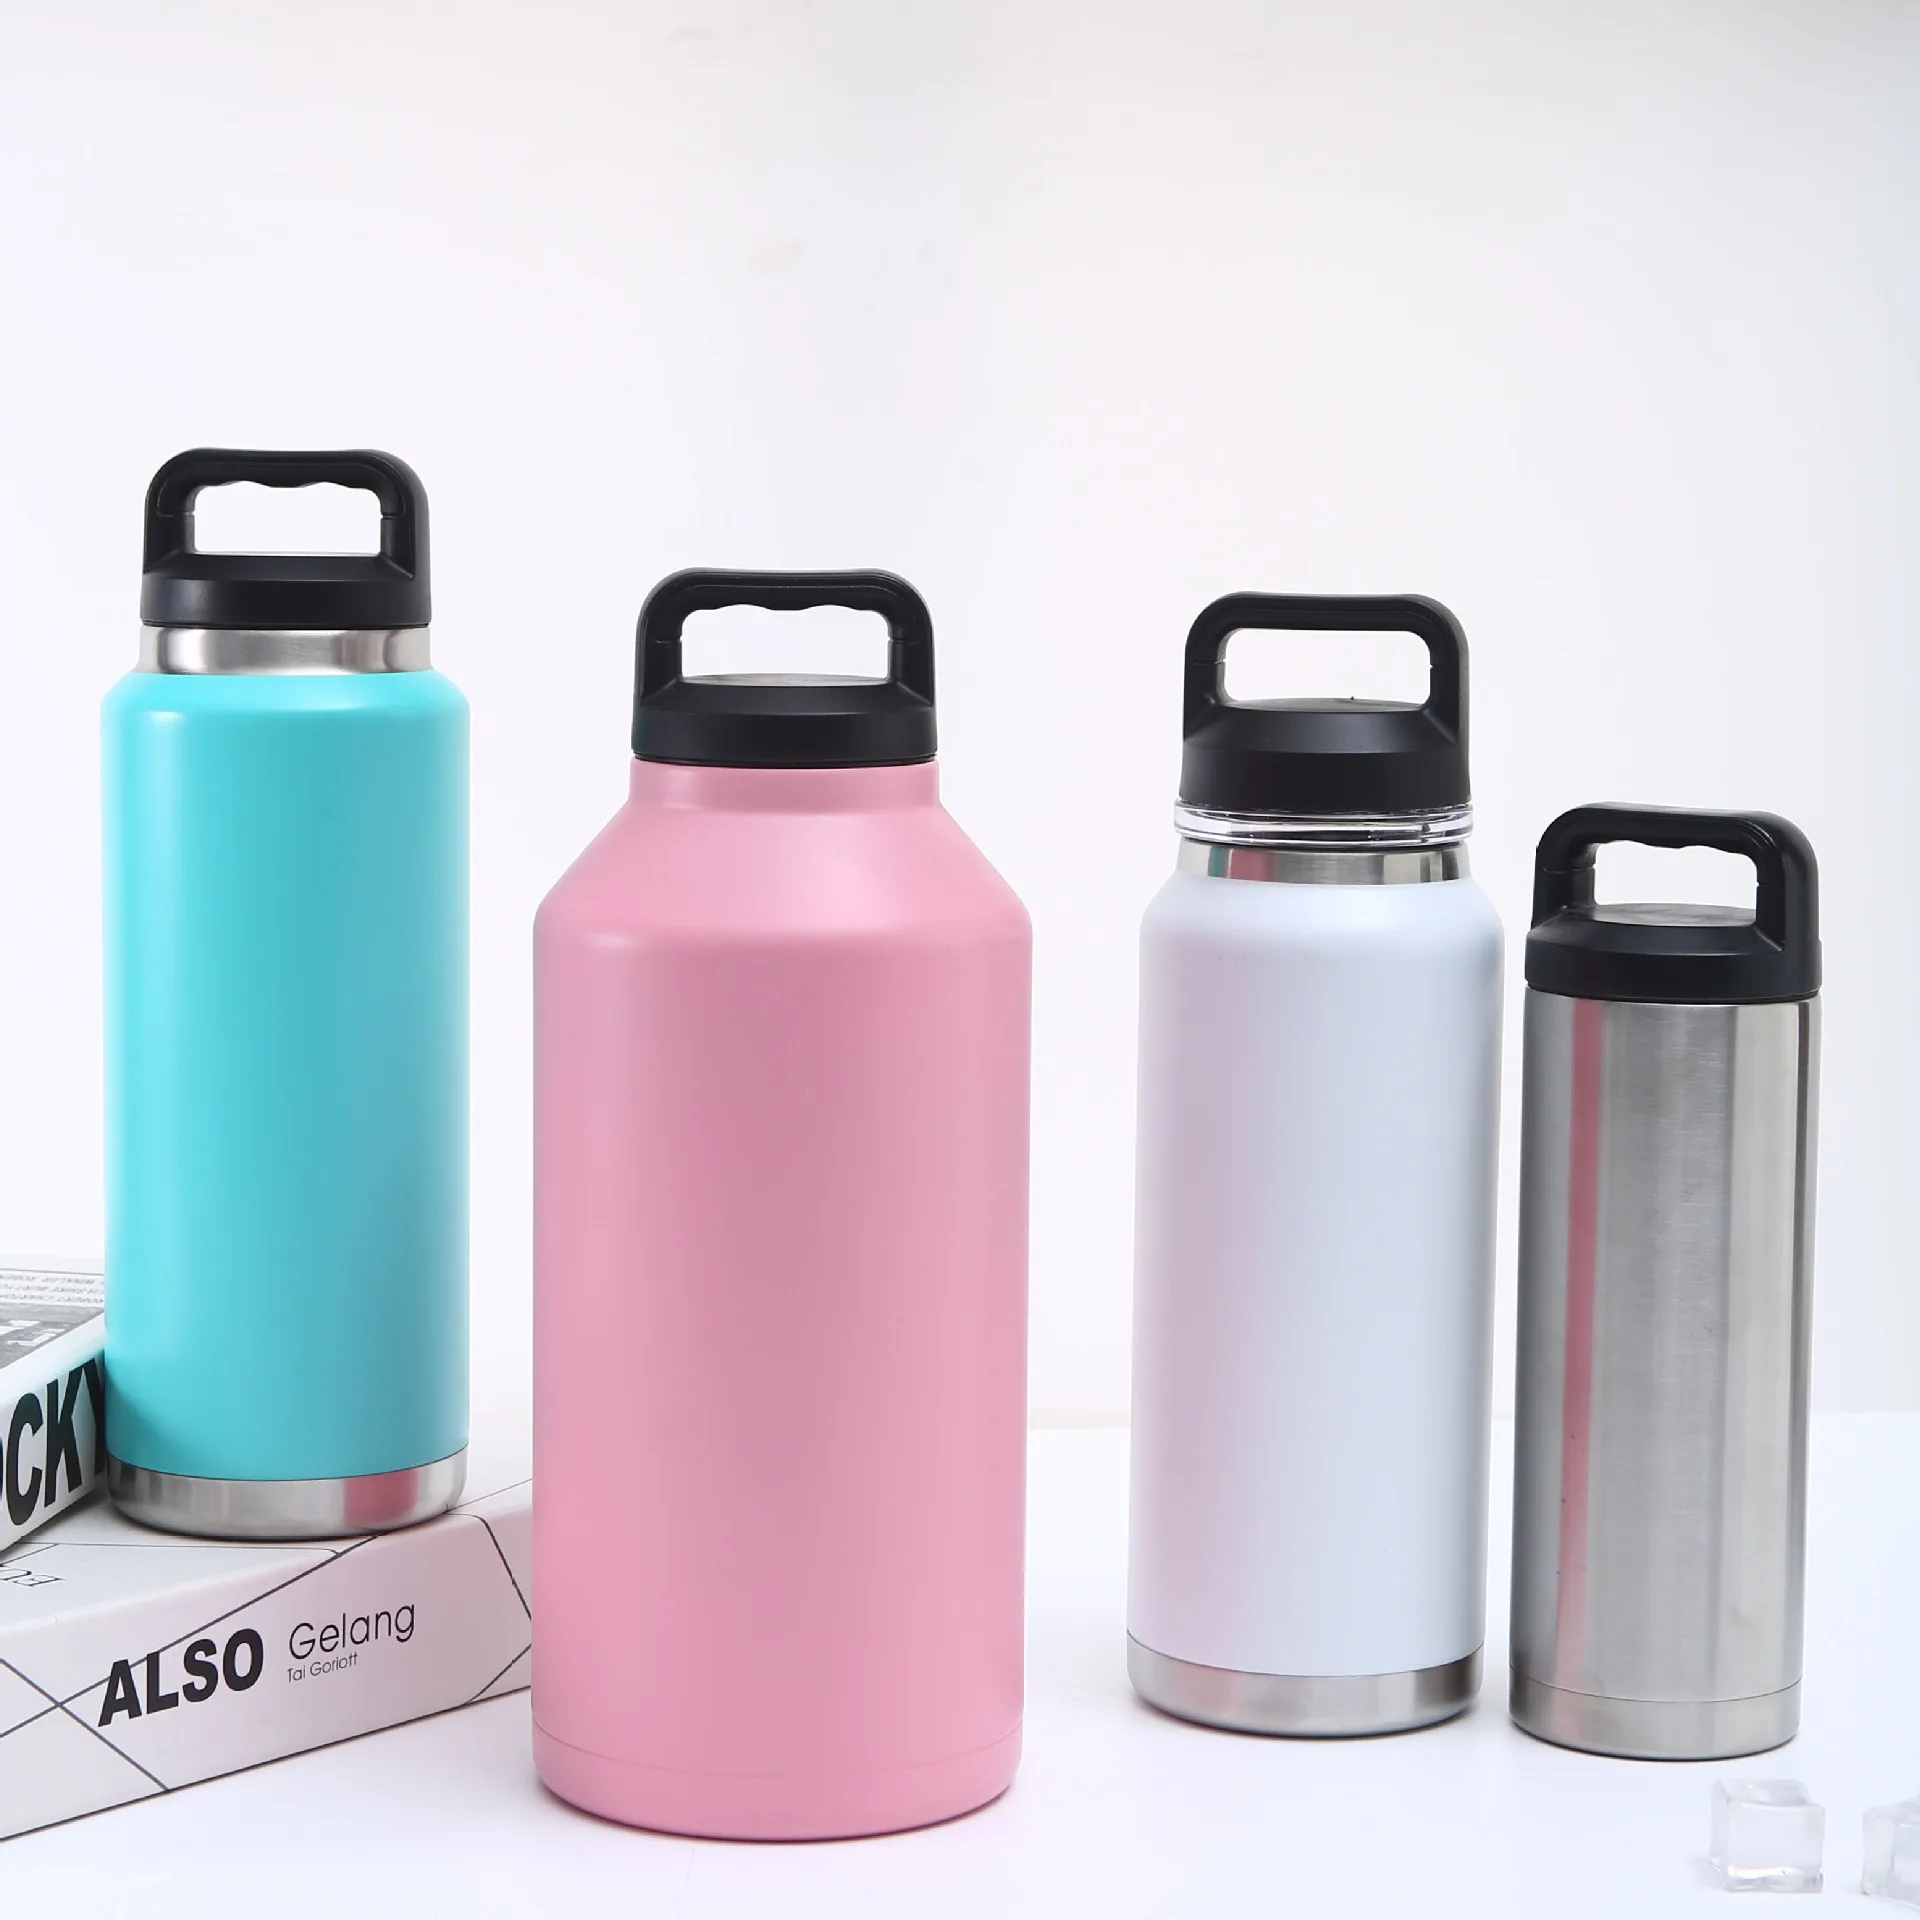 Thermoflask 64oz Insulated Stainless Steel Bottle 2 In 1 Chug And Straw Lid  Black : Target